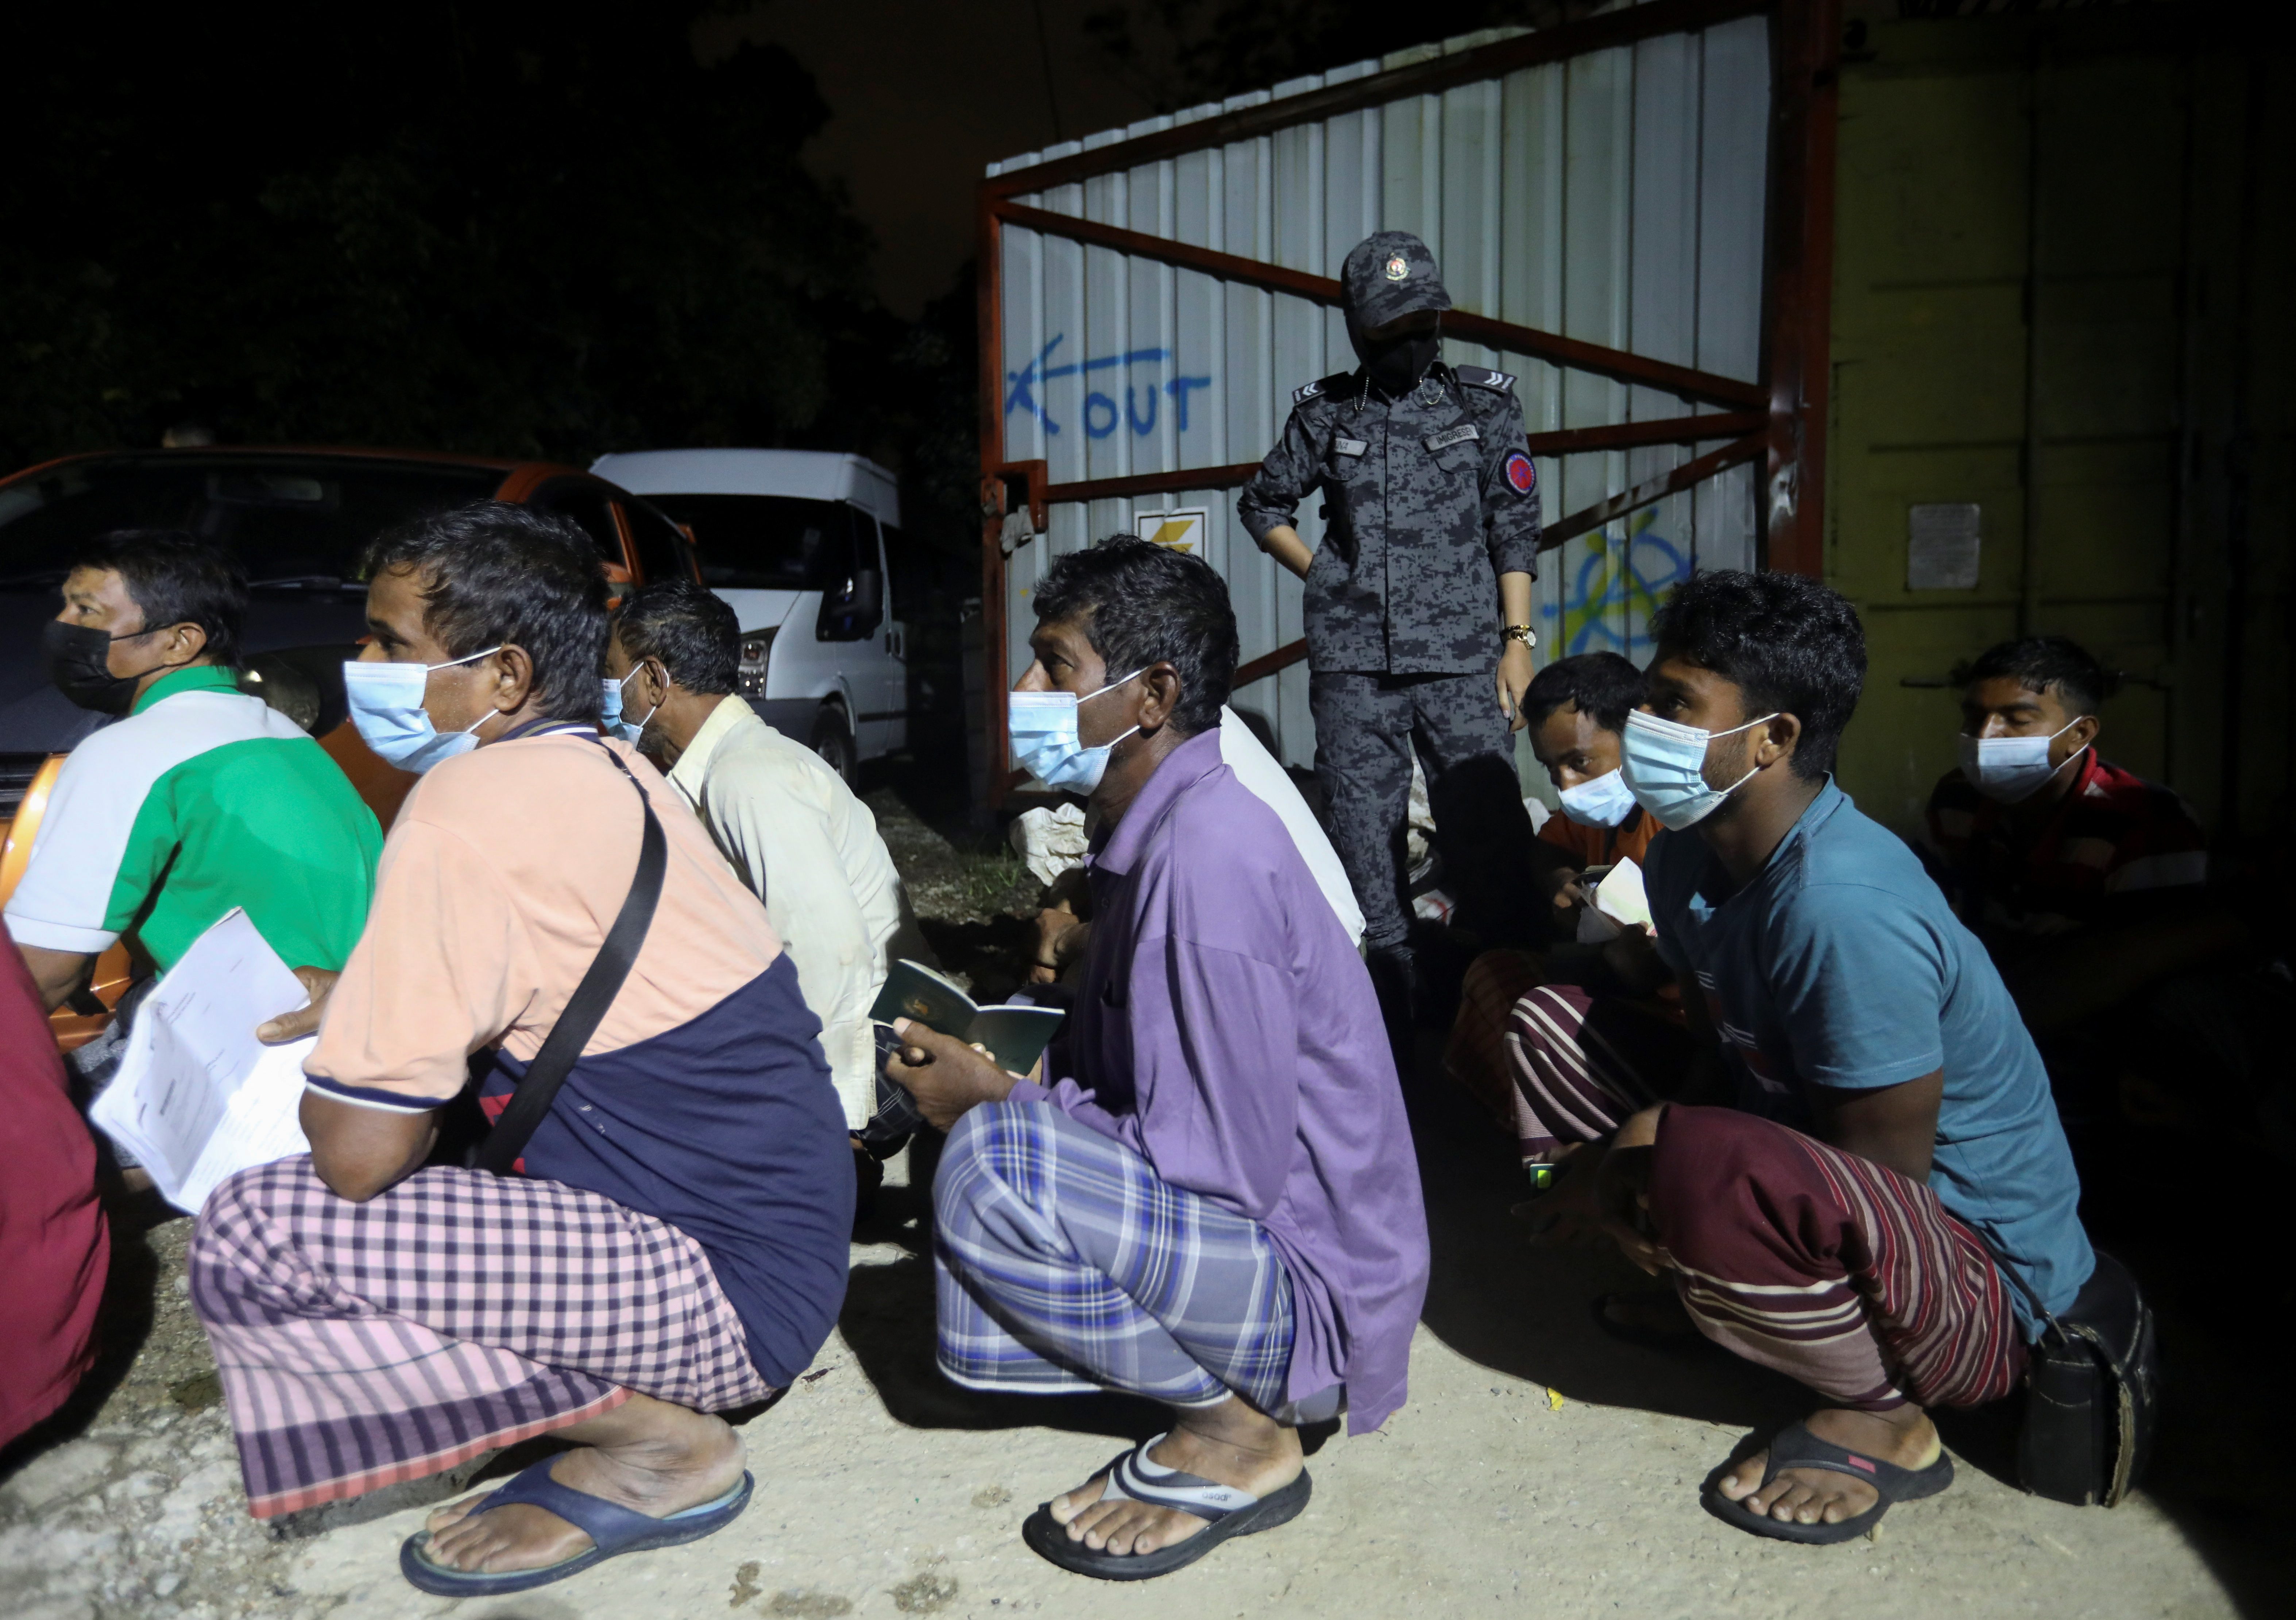 Bangladeshi migrant workers wait for their turn to have their documents checked in Kuala Lumpur